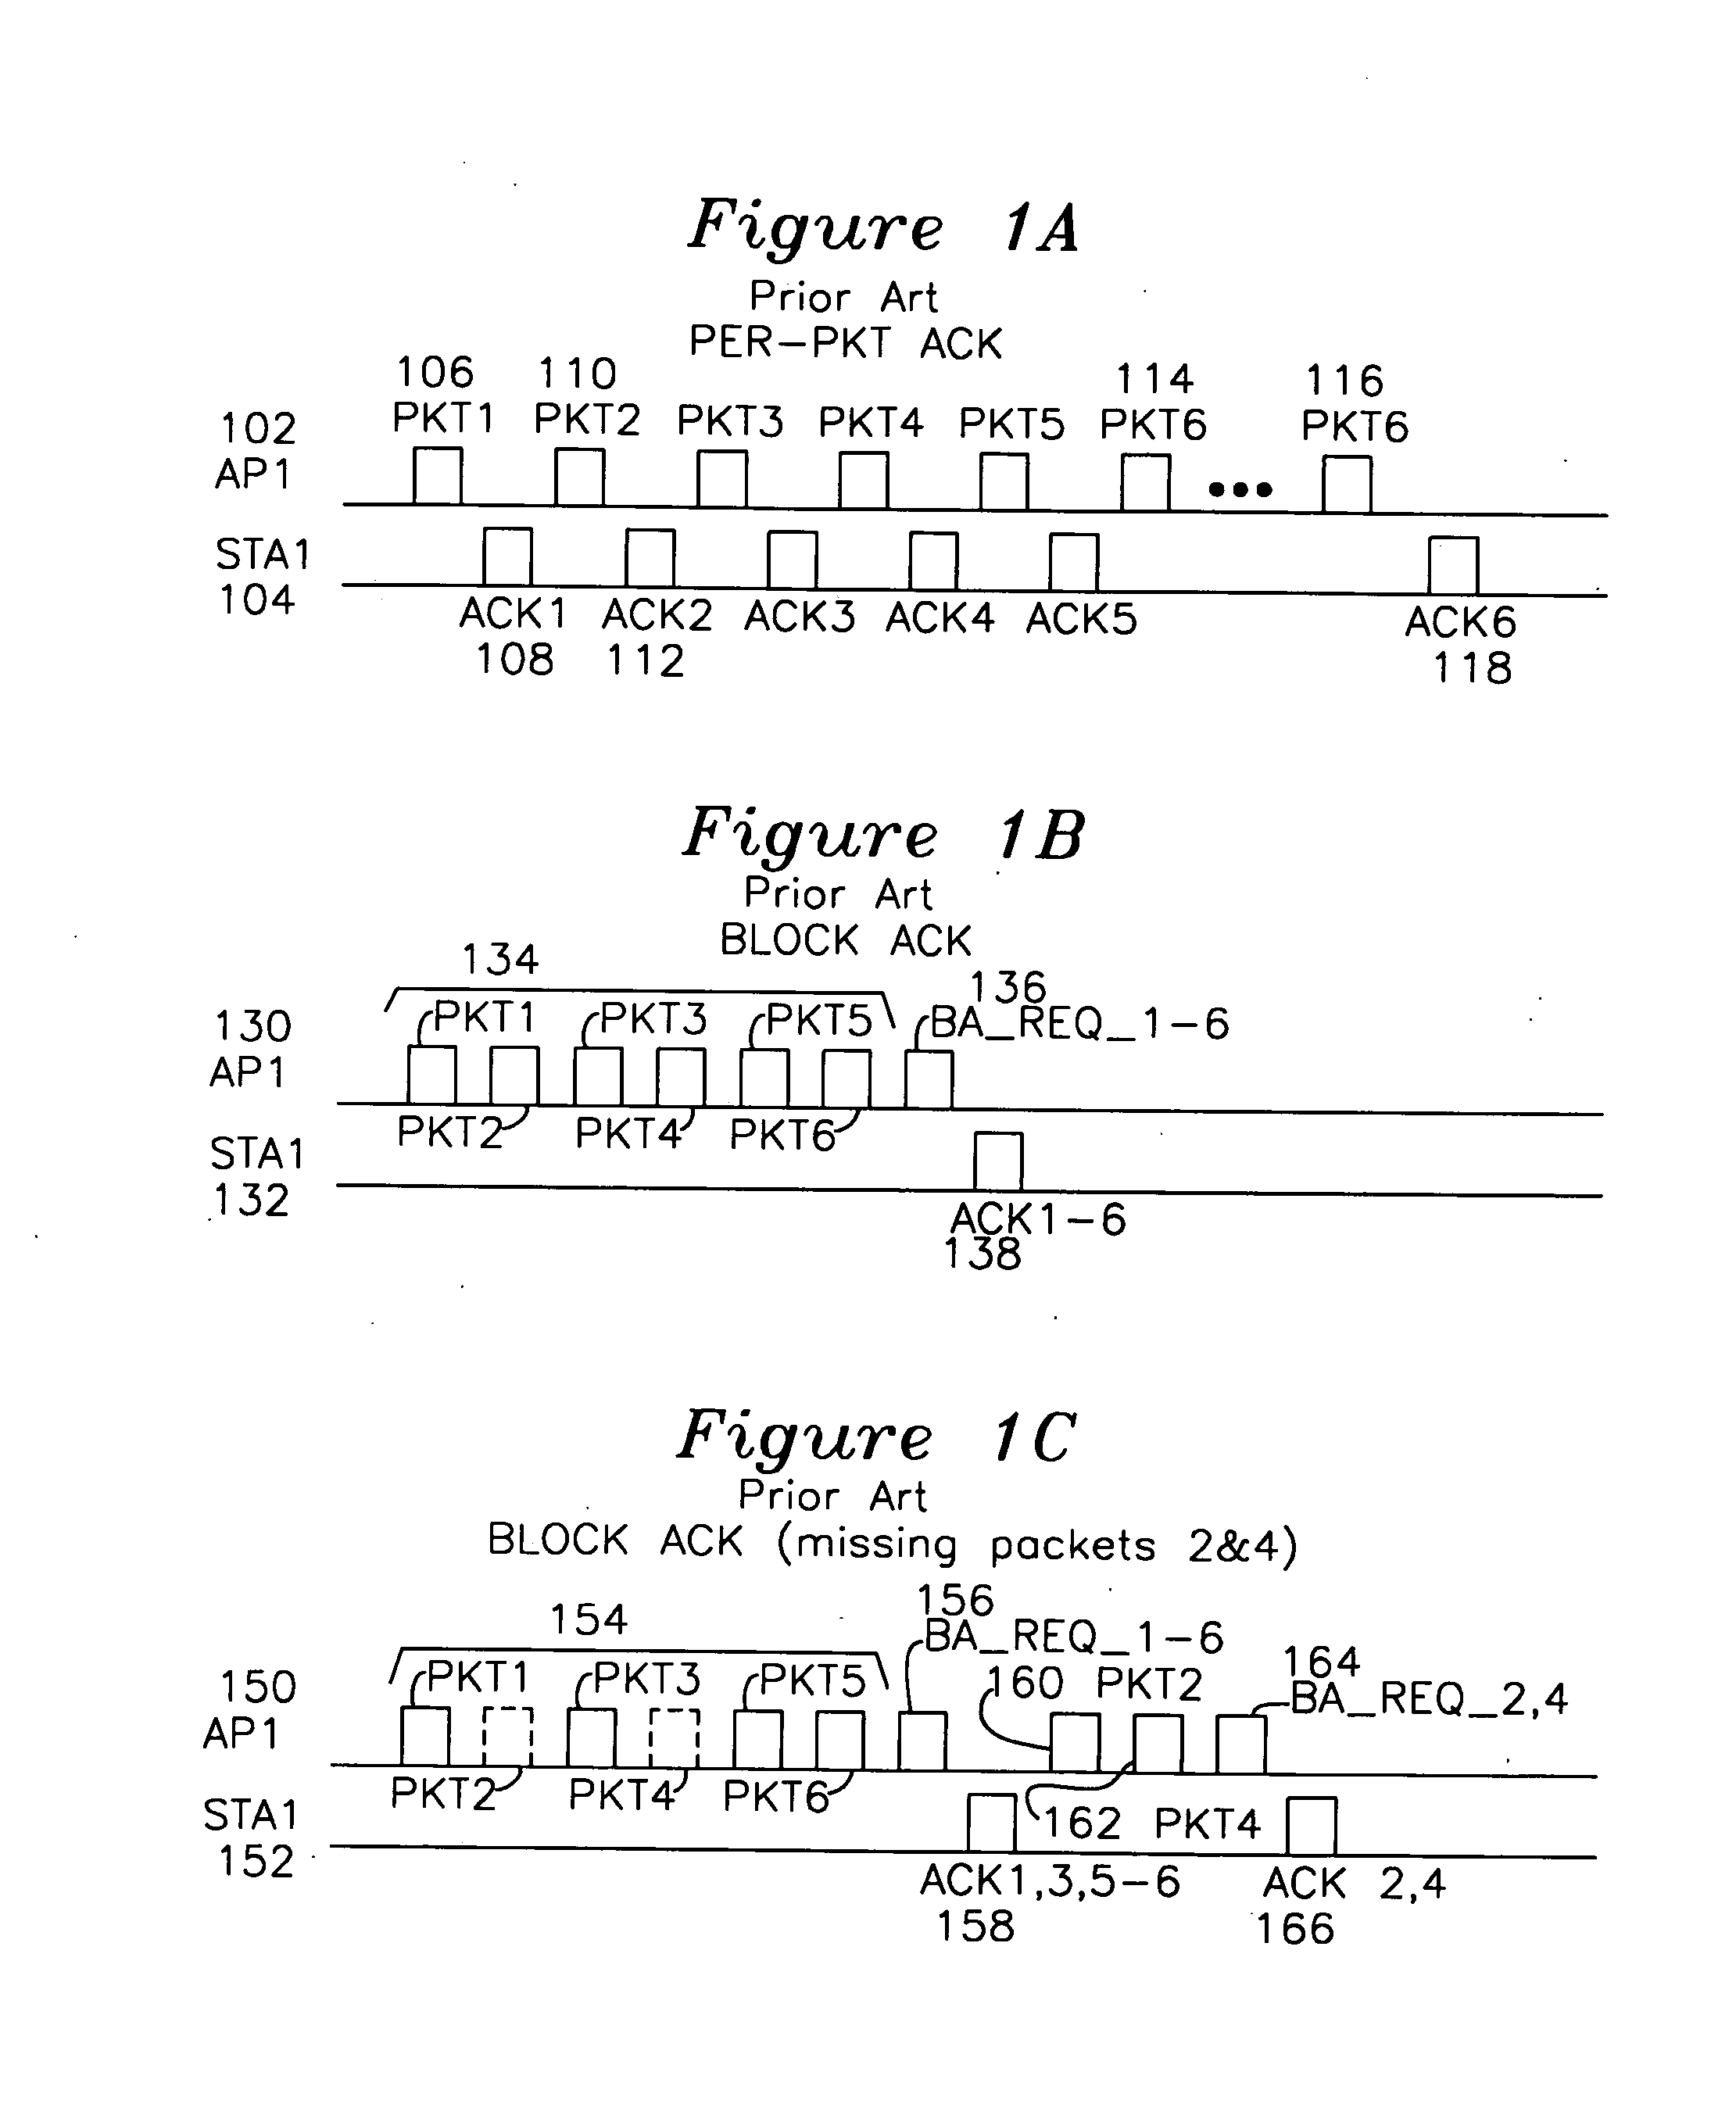 Packet Re-transmission Controller for Block Acknowledgement in a Communications System